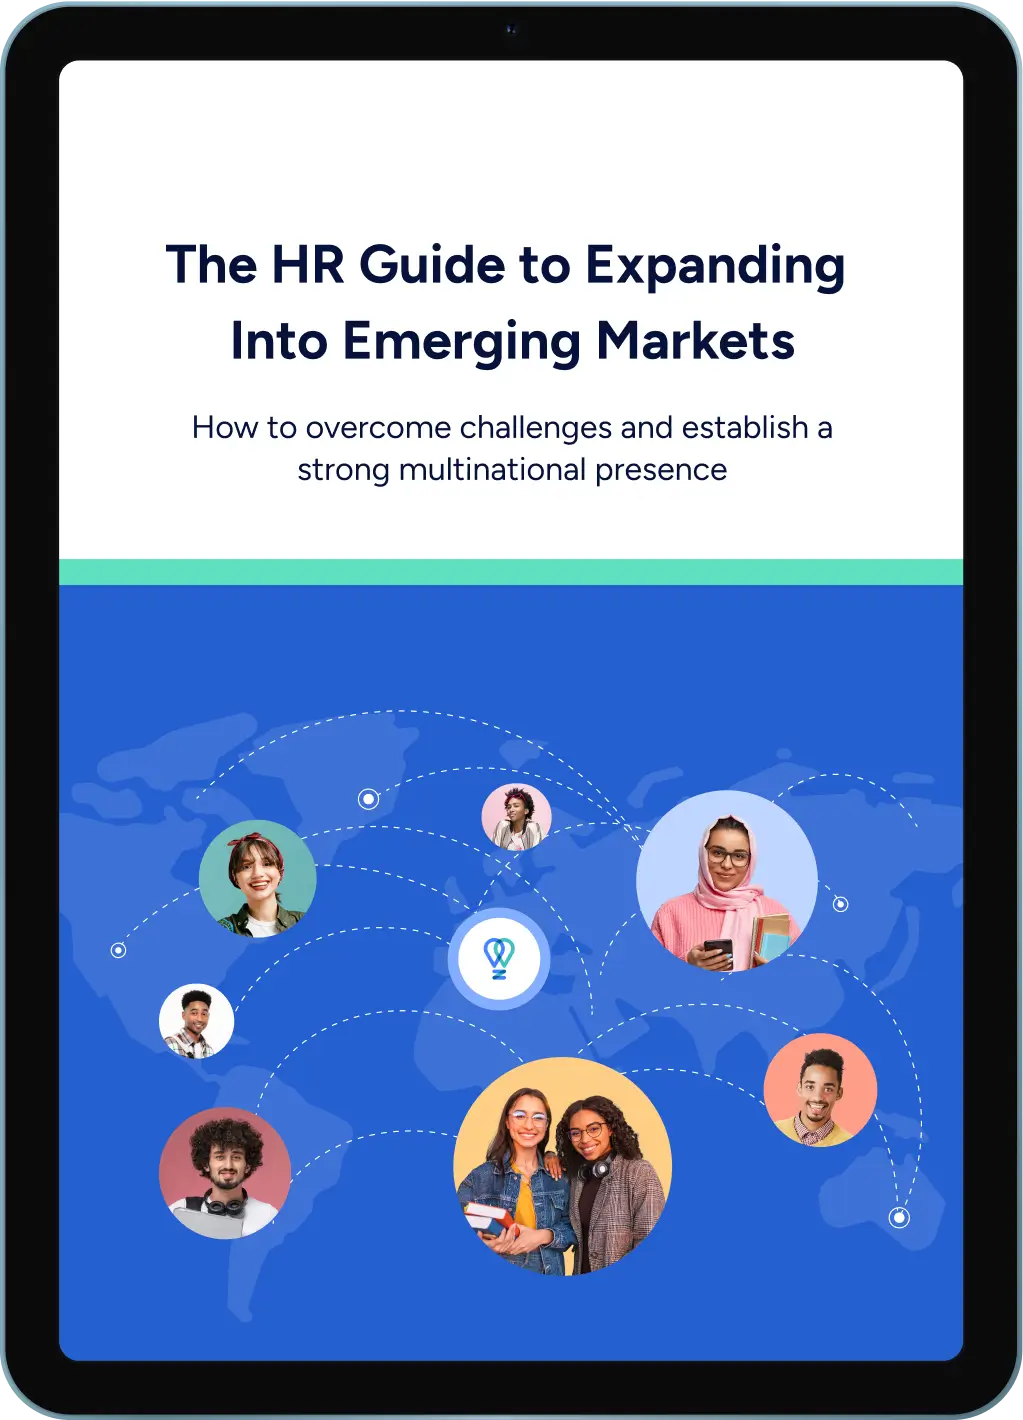 The HR Guide to Expanding Into Emerging Markets